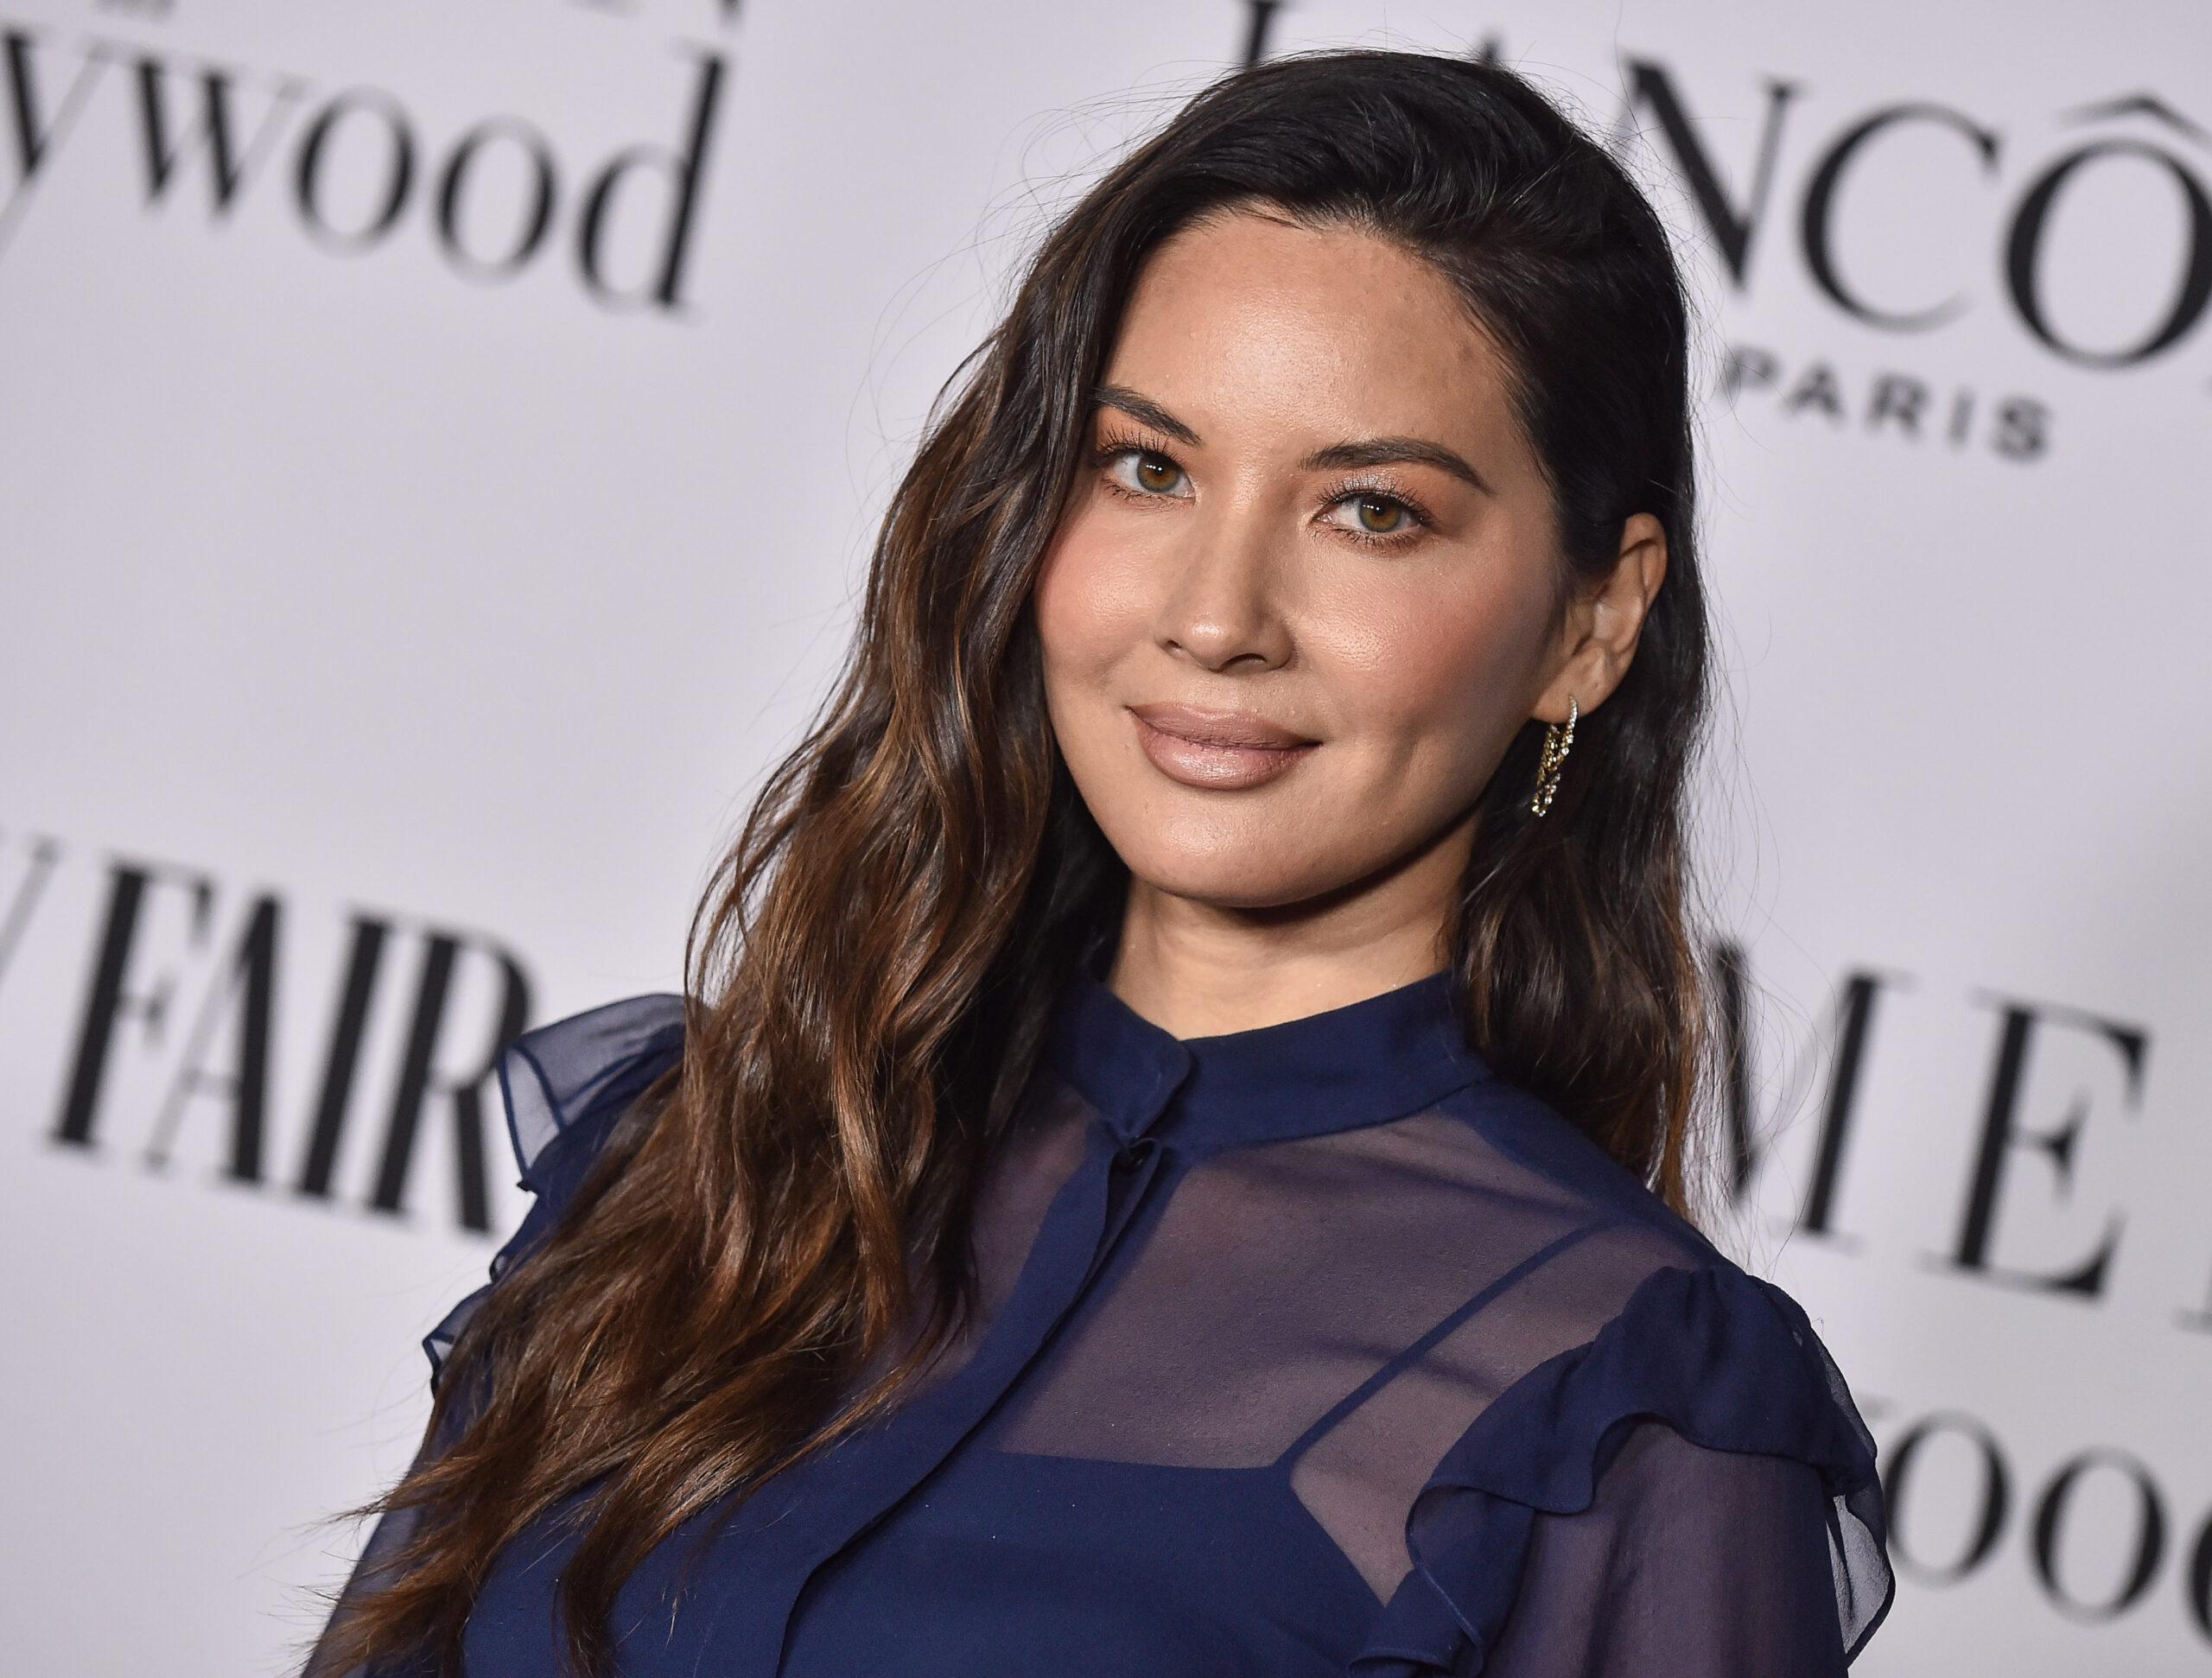 Olivia Munn Vanity Fair Campaign Hollywood: Lancome Women in Hollwood 2020